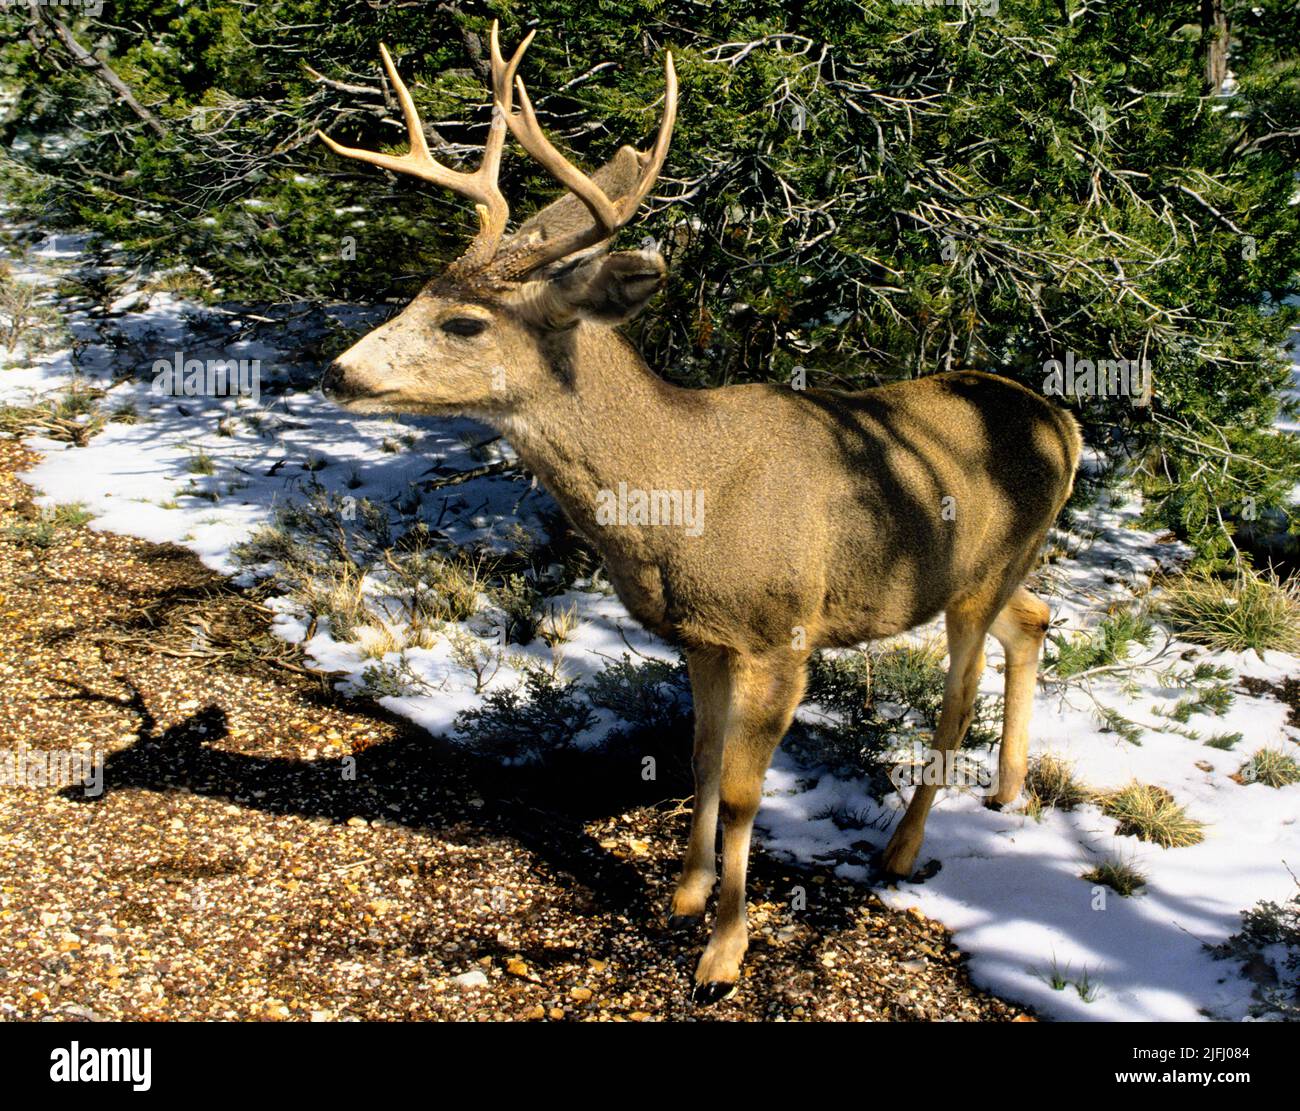 Mule Deer (Odocoileus Hemionus) buck with antlers, standing in melting snow in the forest of Yellowstone National Park, Wyoming, USA Stock Photo